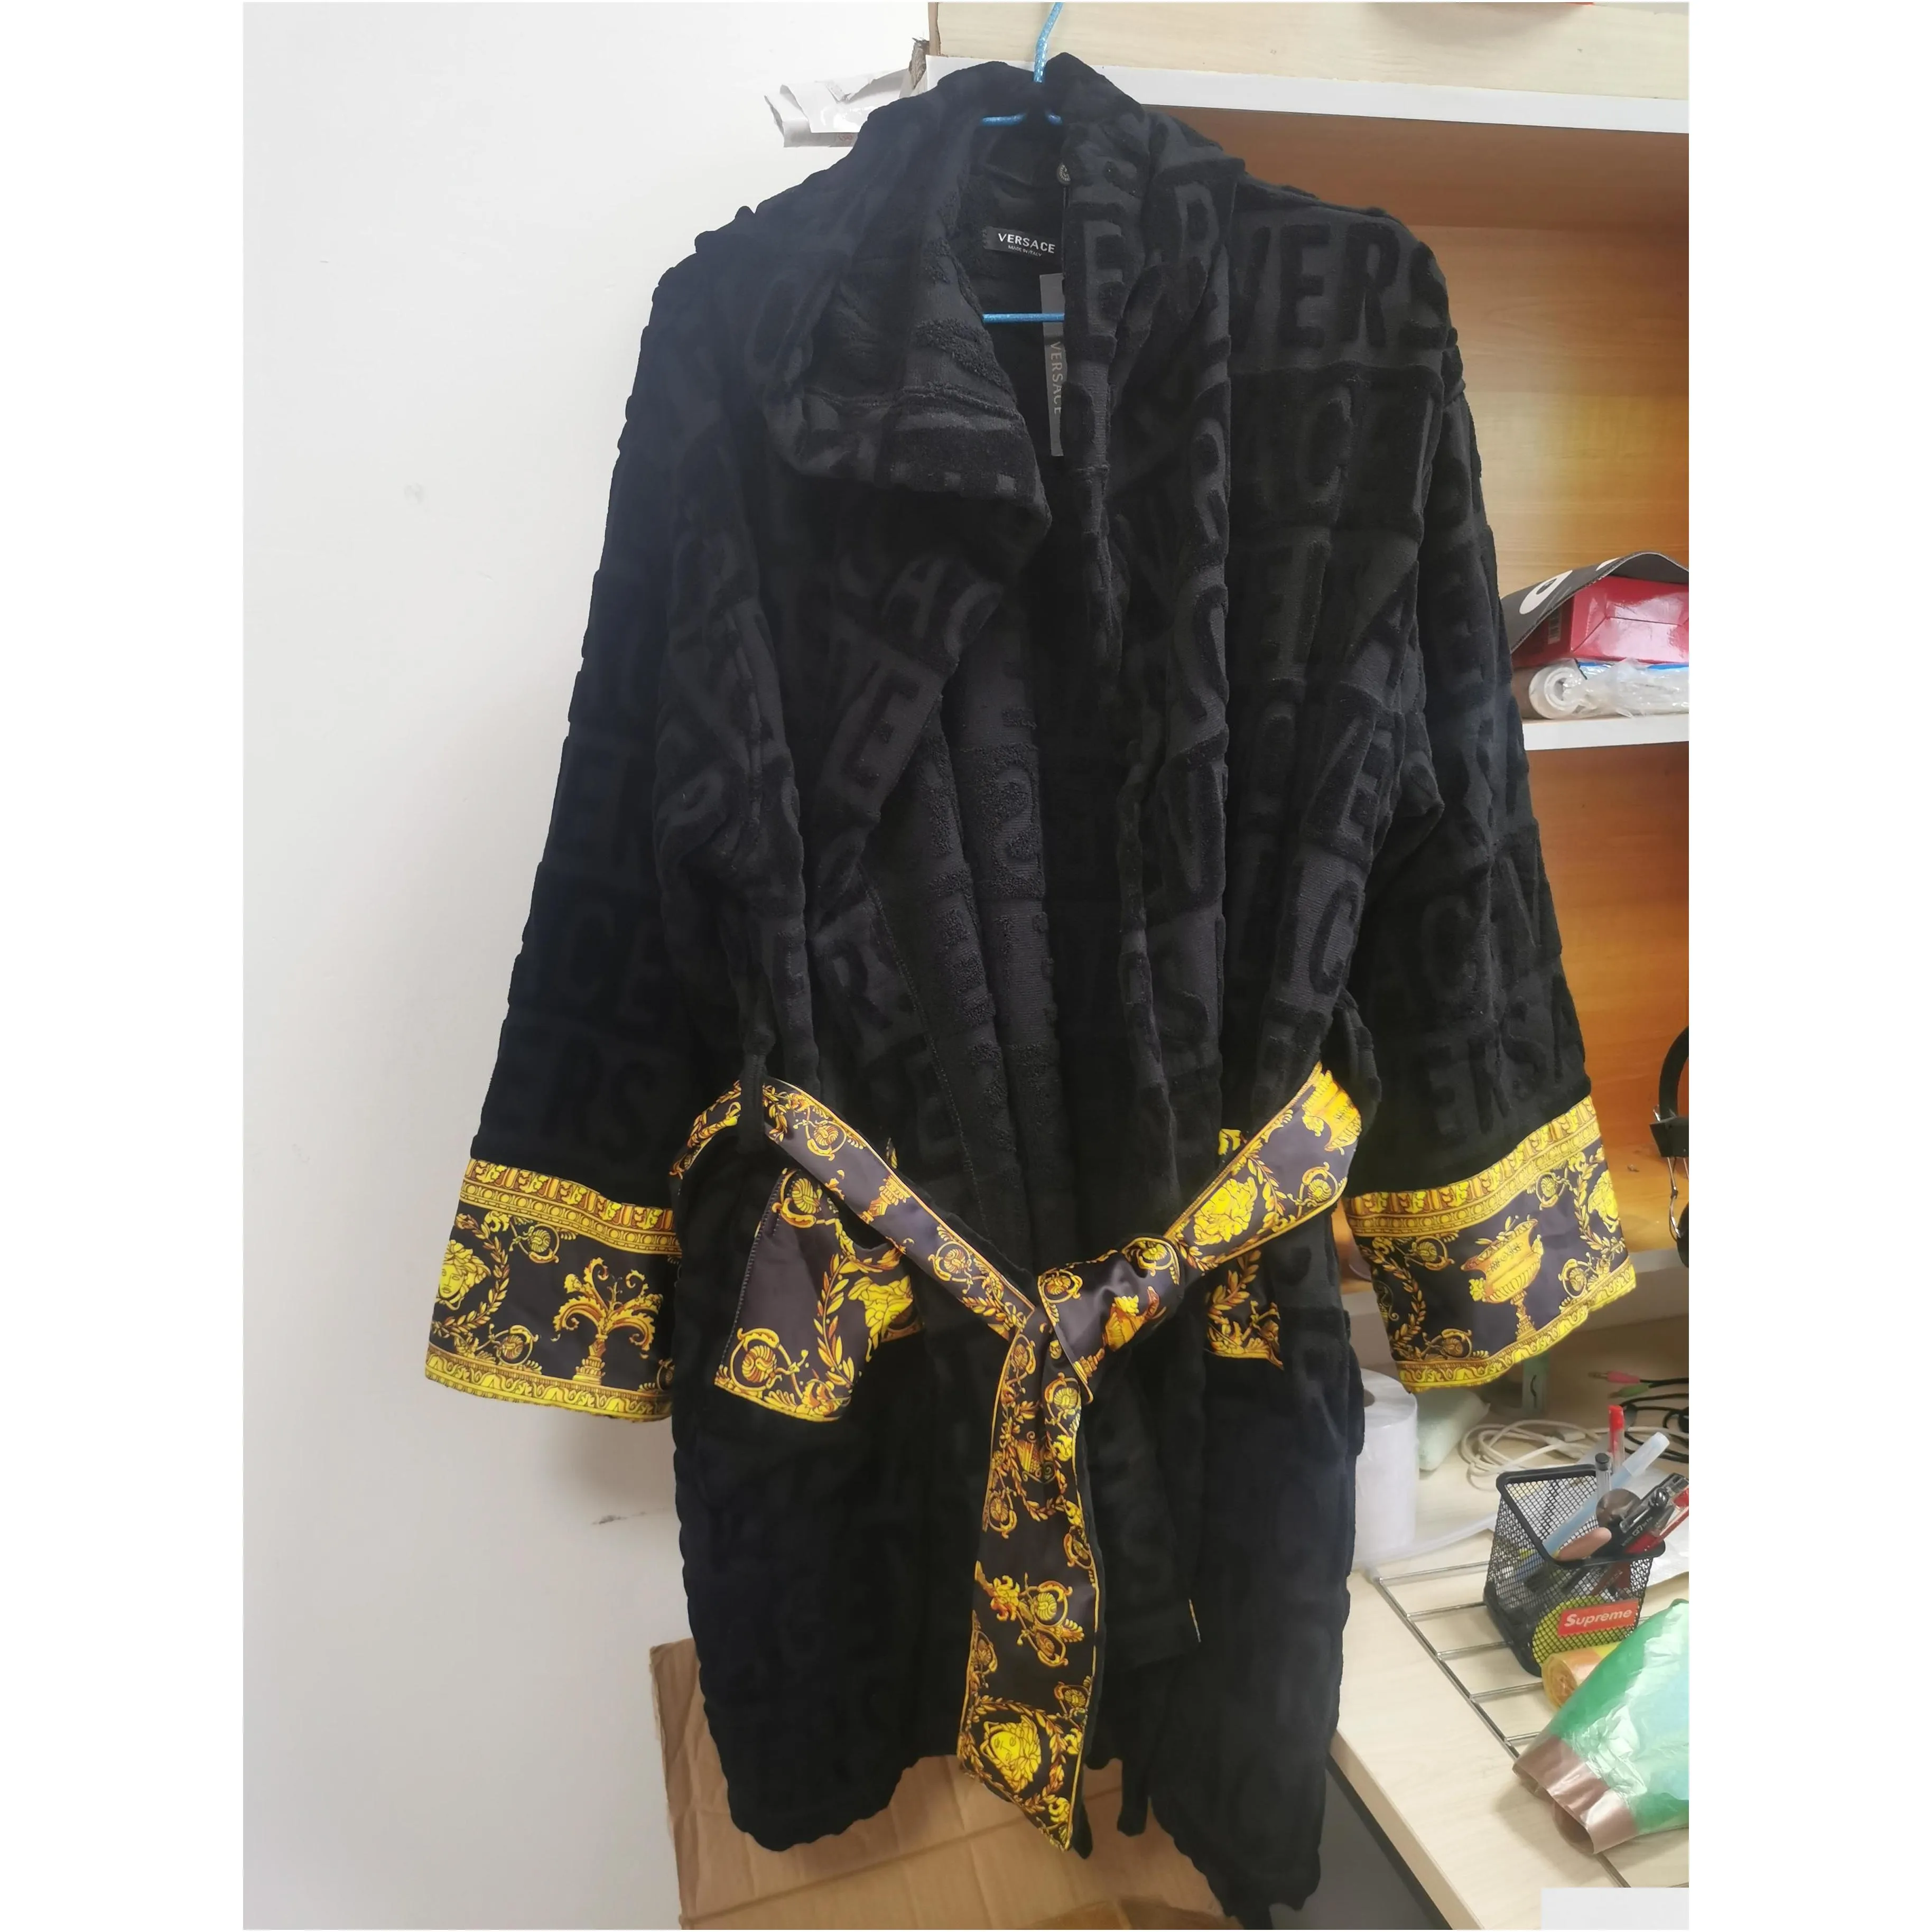 Men Women Home Bath Robe INS Letter Jacquard Sleepwear Black Soft Touch Casual Robes Hotel Nightgown